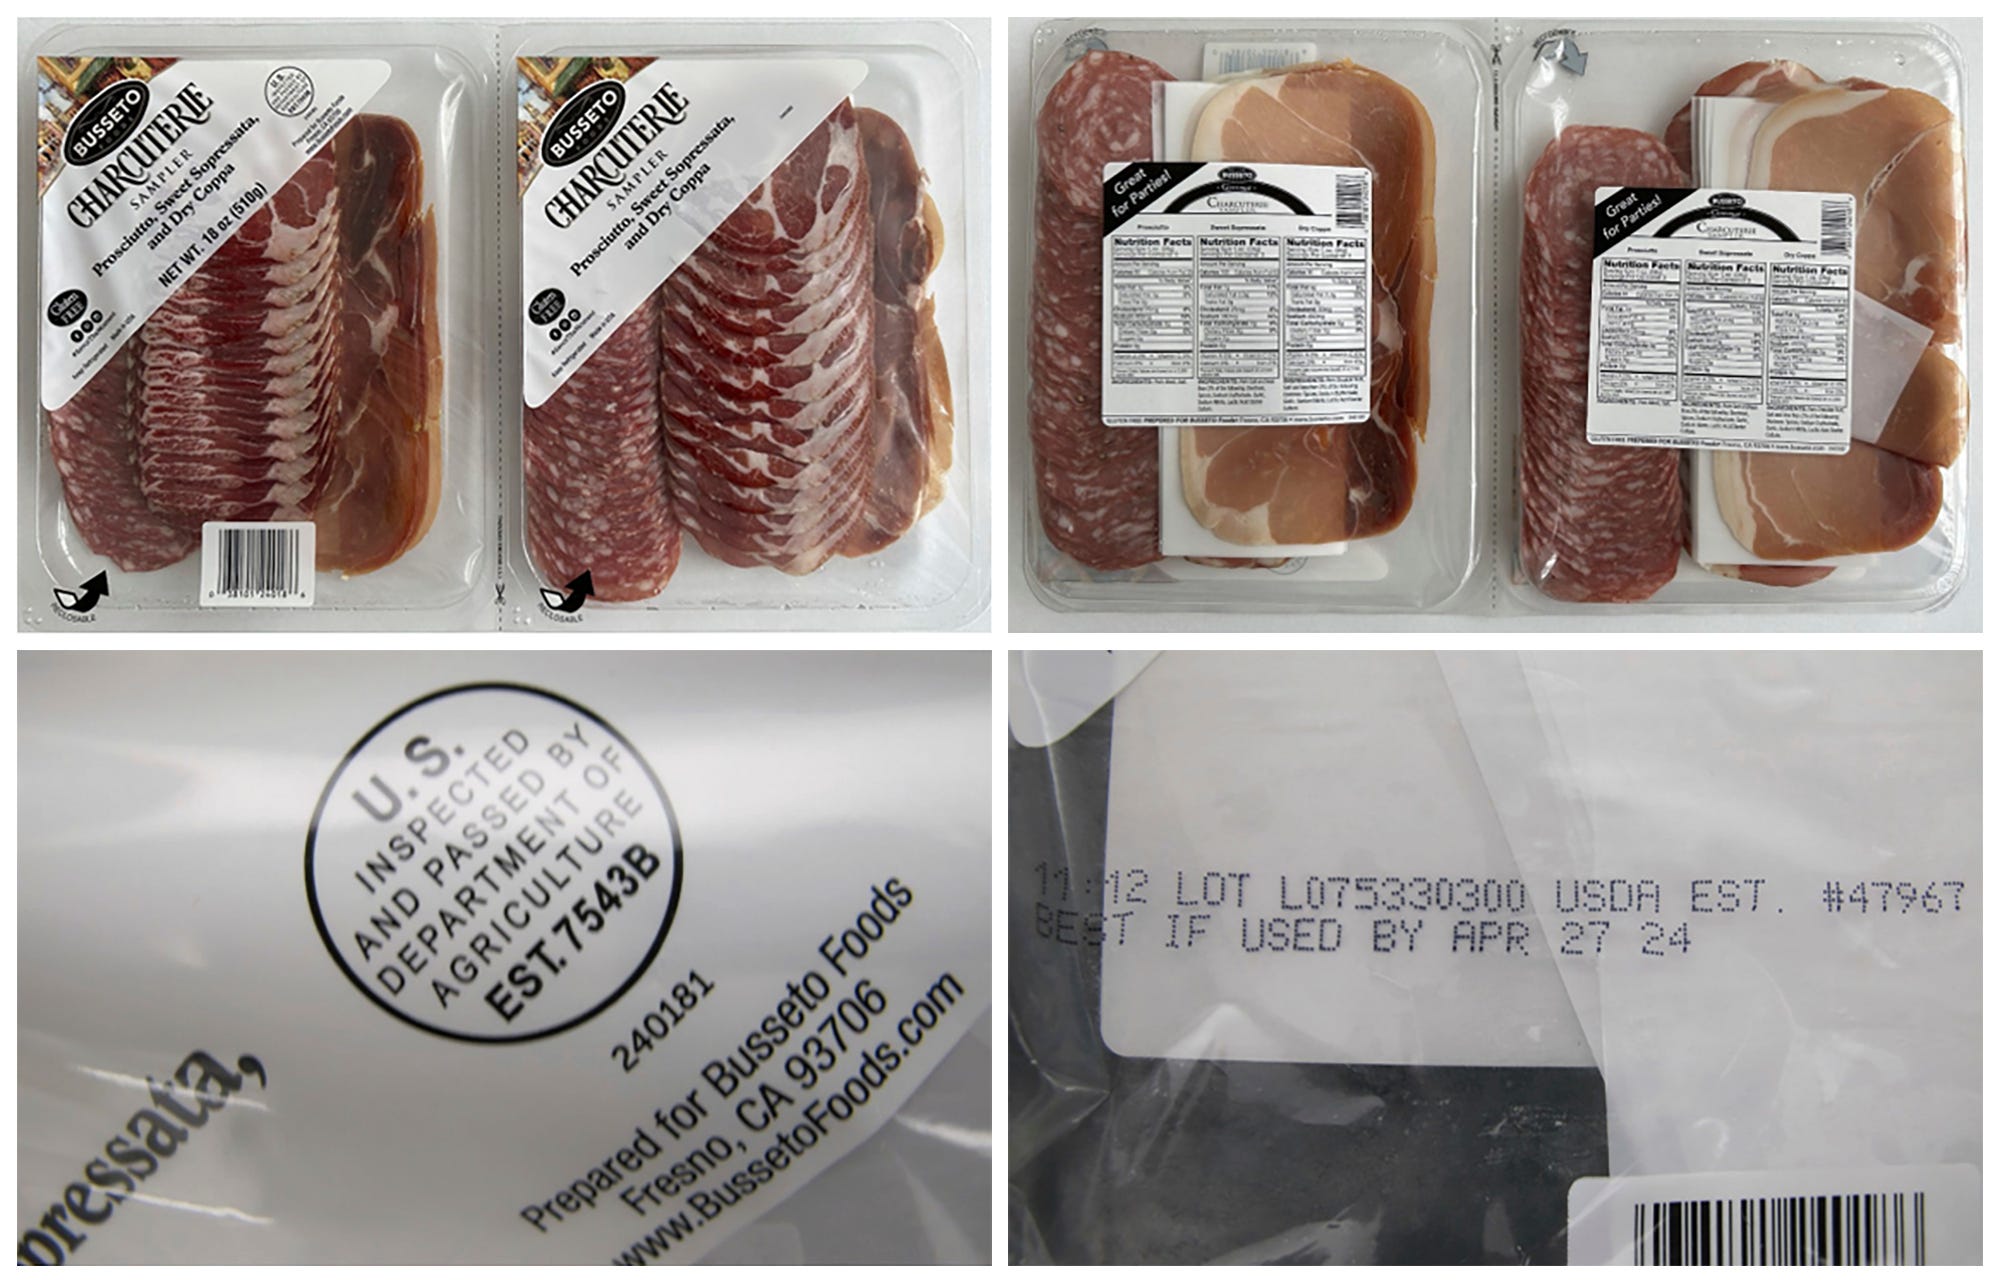 Sam's Club charcuterie meat recall may be linked to salmonella outbreak